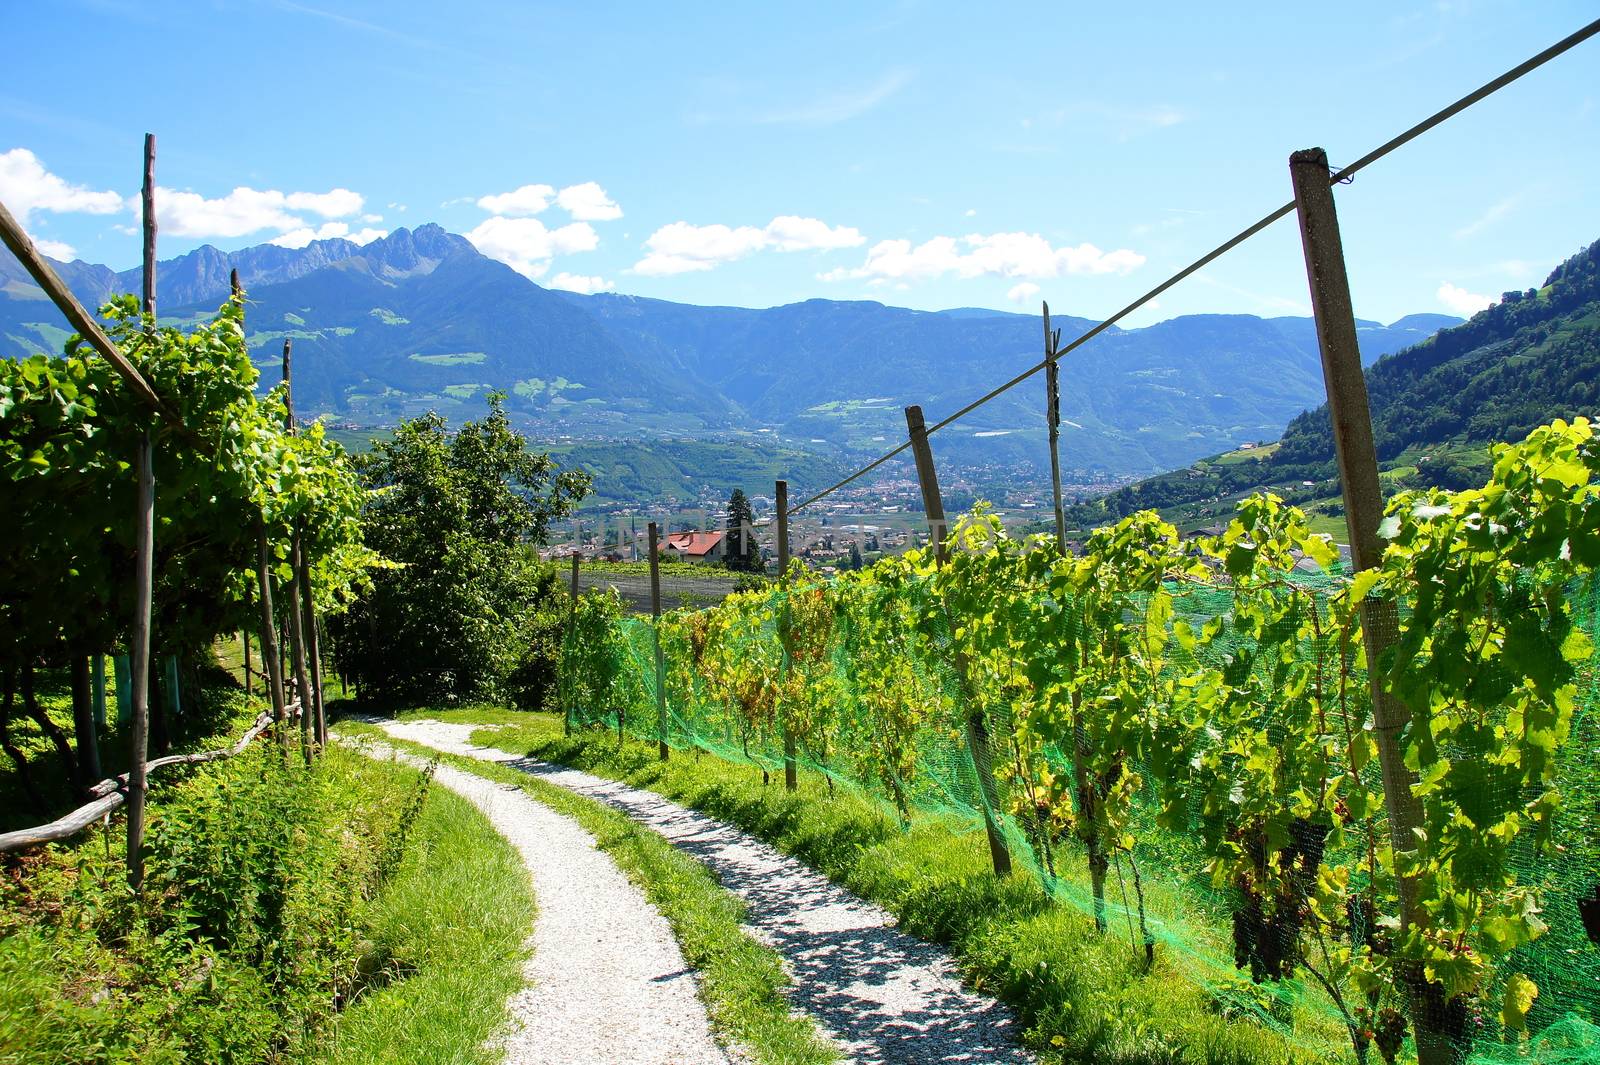 Hiking trail through the vineyards and orchards in the Val Venosta in South Tyrol